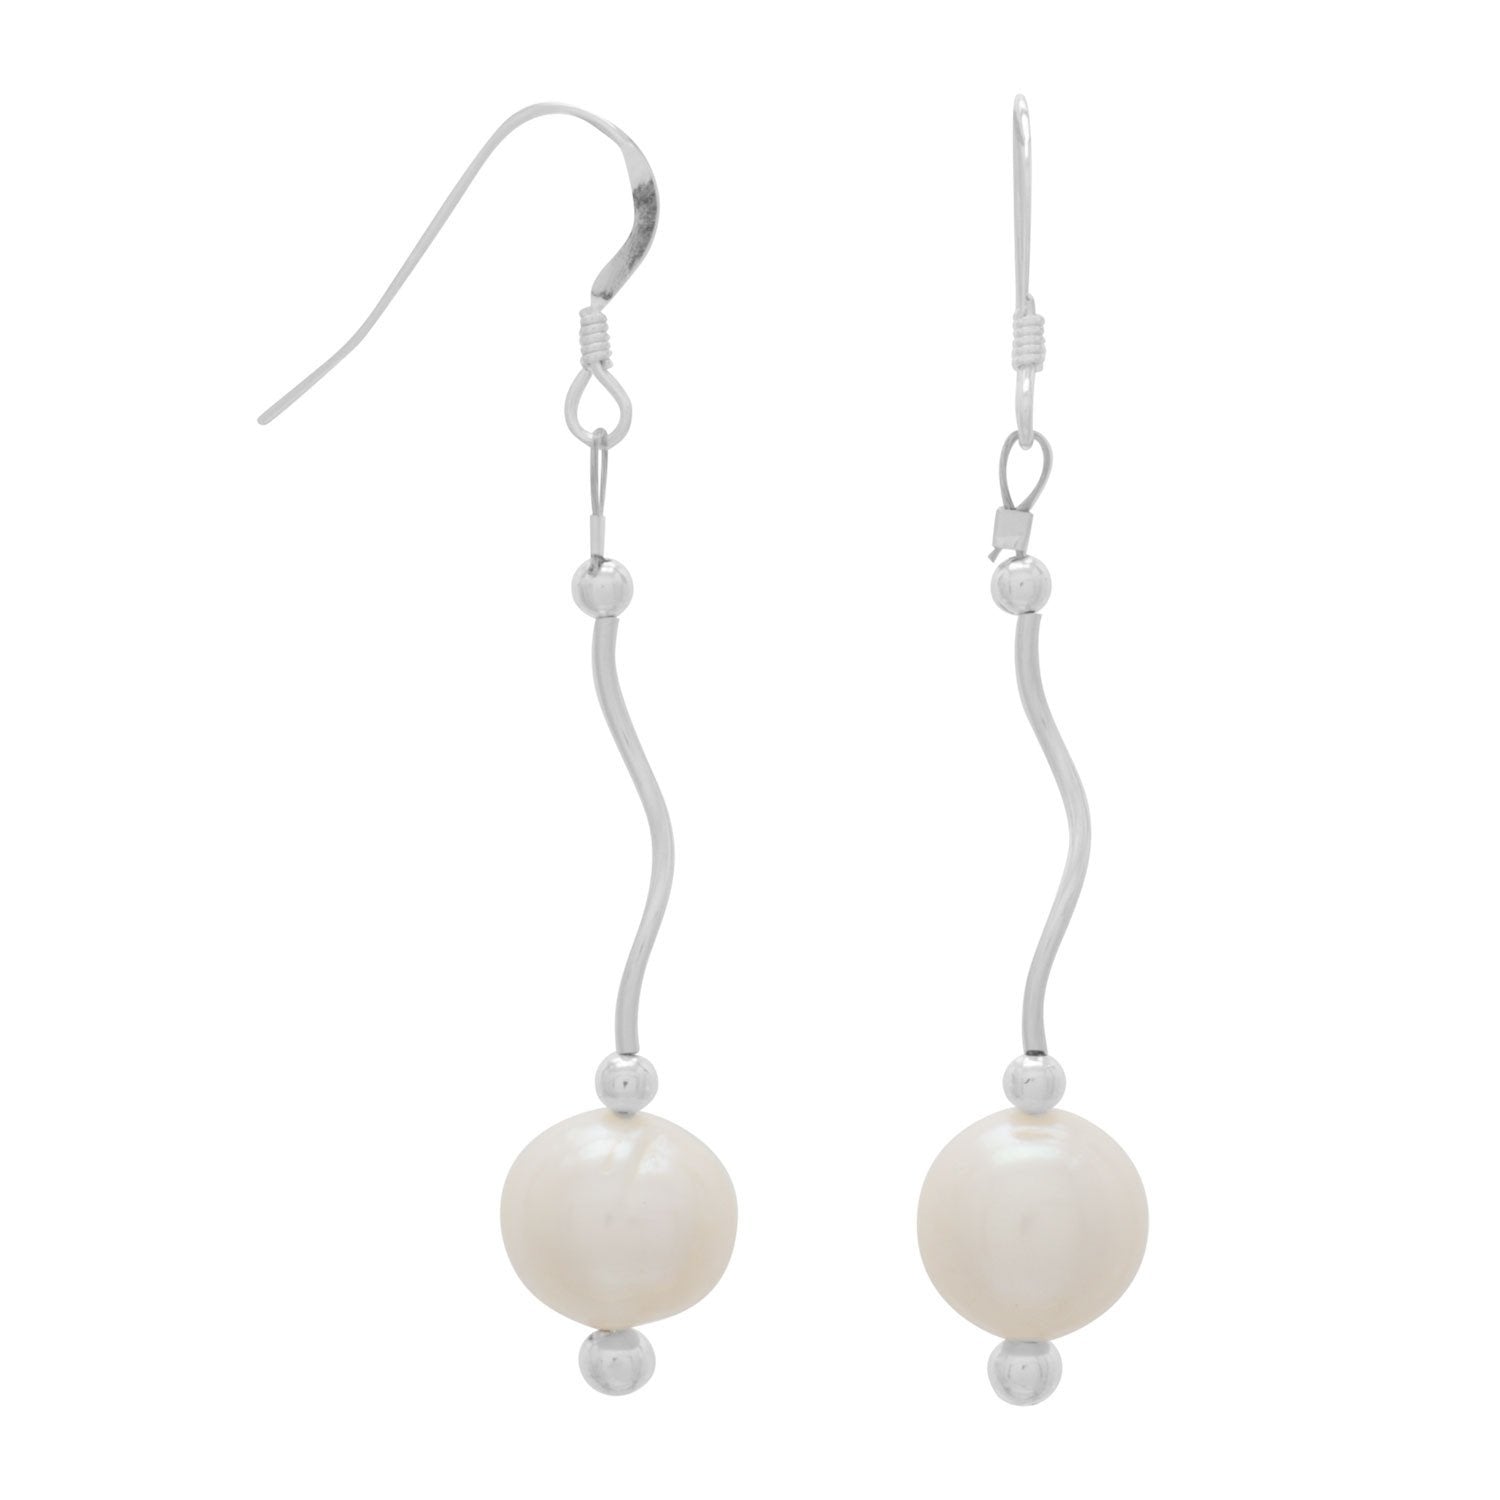 Wave Design Earrings with Cultured Freshwater Pearl Drop - Joyeria Lady